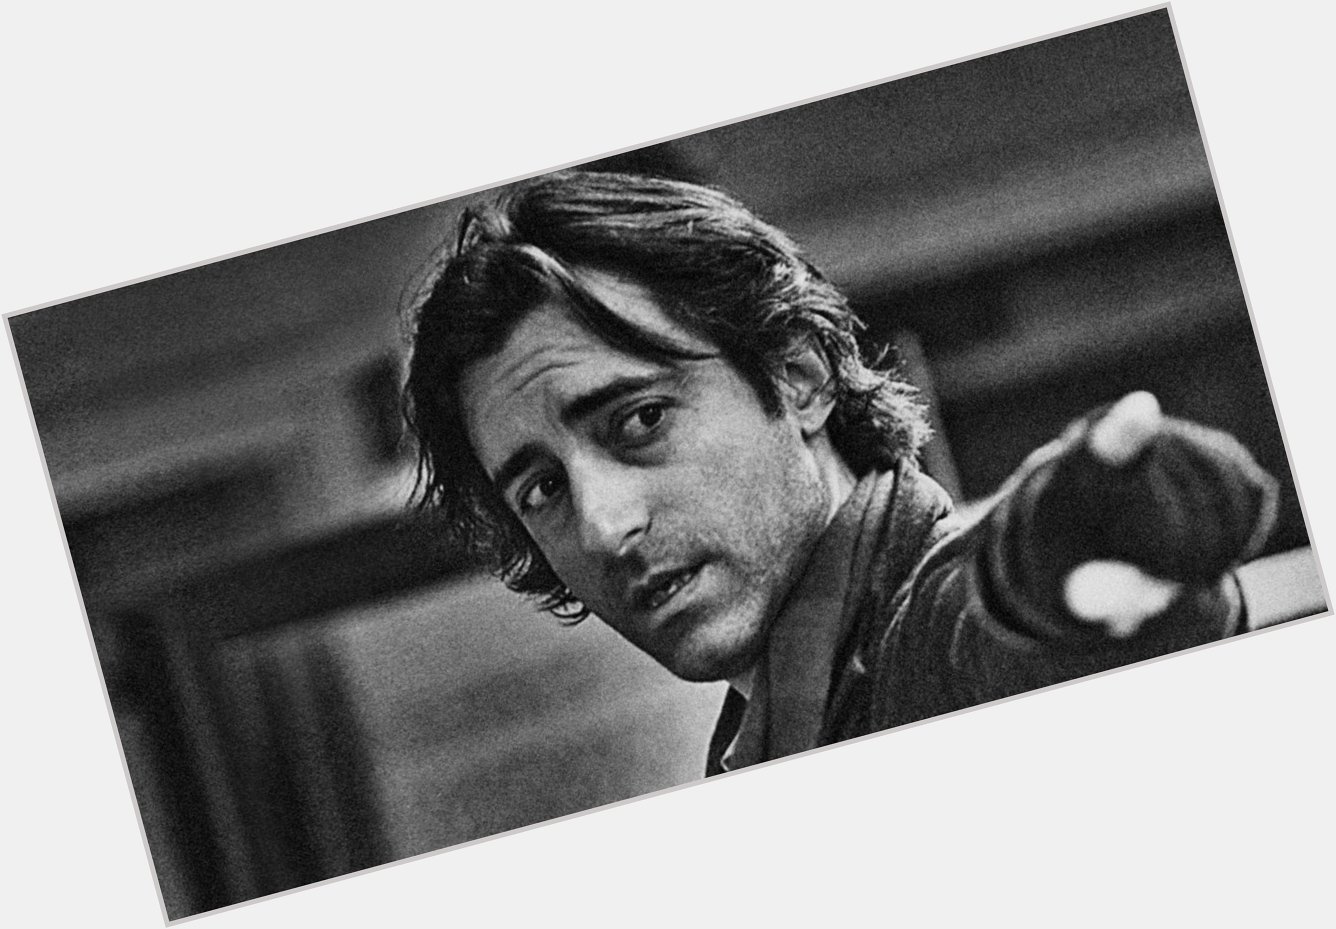 Wishing the handsome and talented director Noah Baumbach a very happy 48th birthday today. 